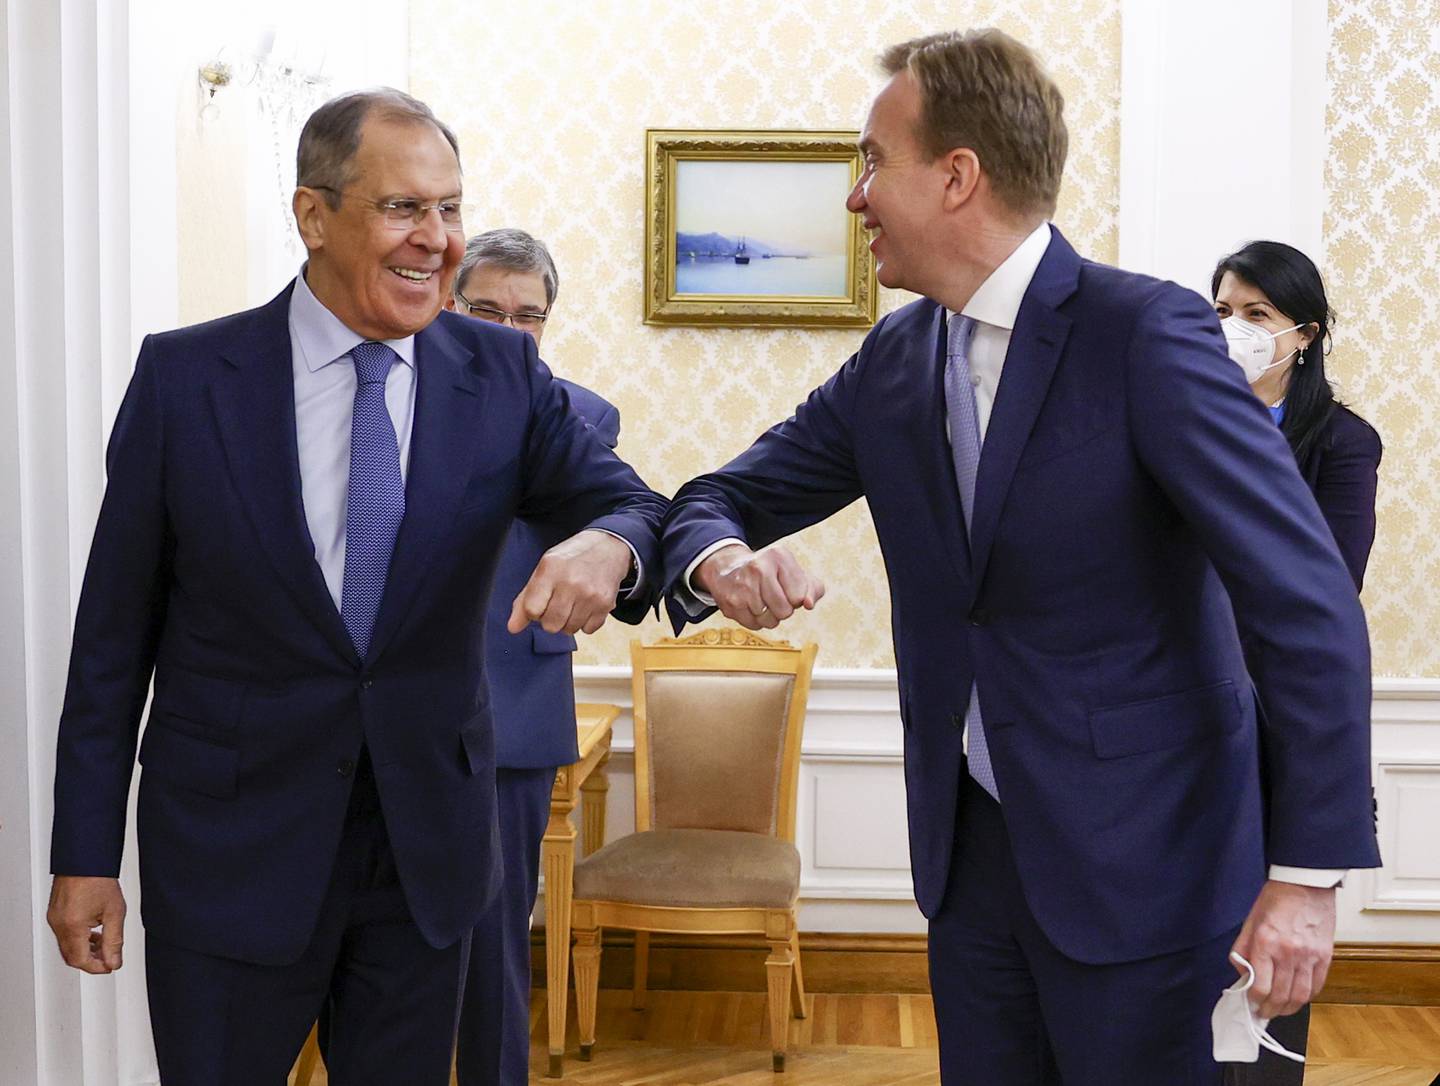 In this photo released by the Russian Foreign Ministry Press Service, Russian Foreign Minister Sergey Lavrov, left, and President of the World Economic Forum Borge Brende greet each other prior to their talks in Moscow, Russia, Friday, Dec. 18, 2020. (Russian Foreign Ministry Press Service via AP)